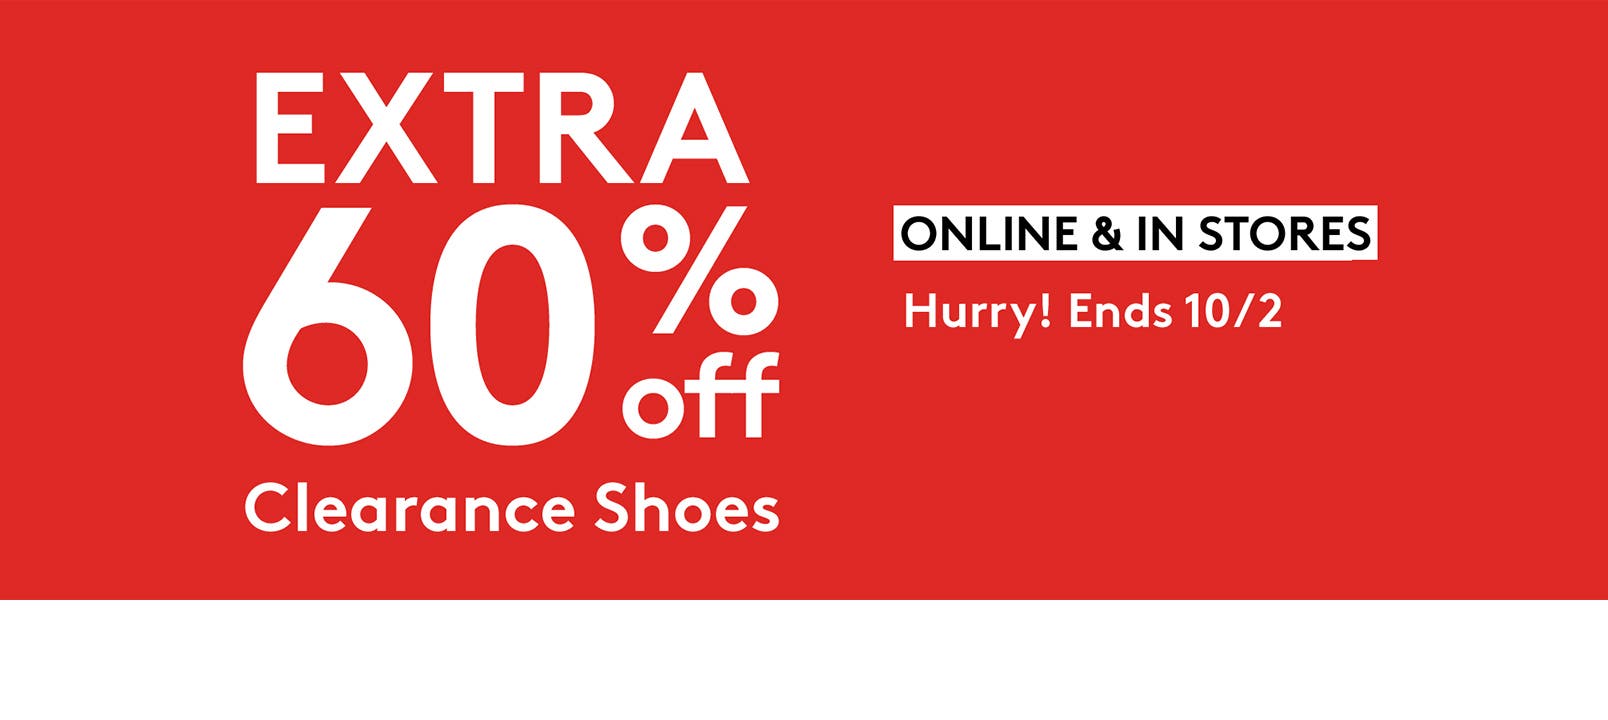 Extra sixty percent off clearance shoes online and in stores. Hurry! Ends October second.